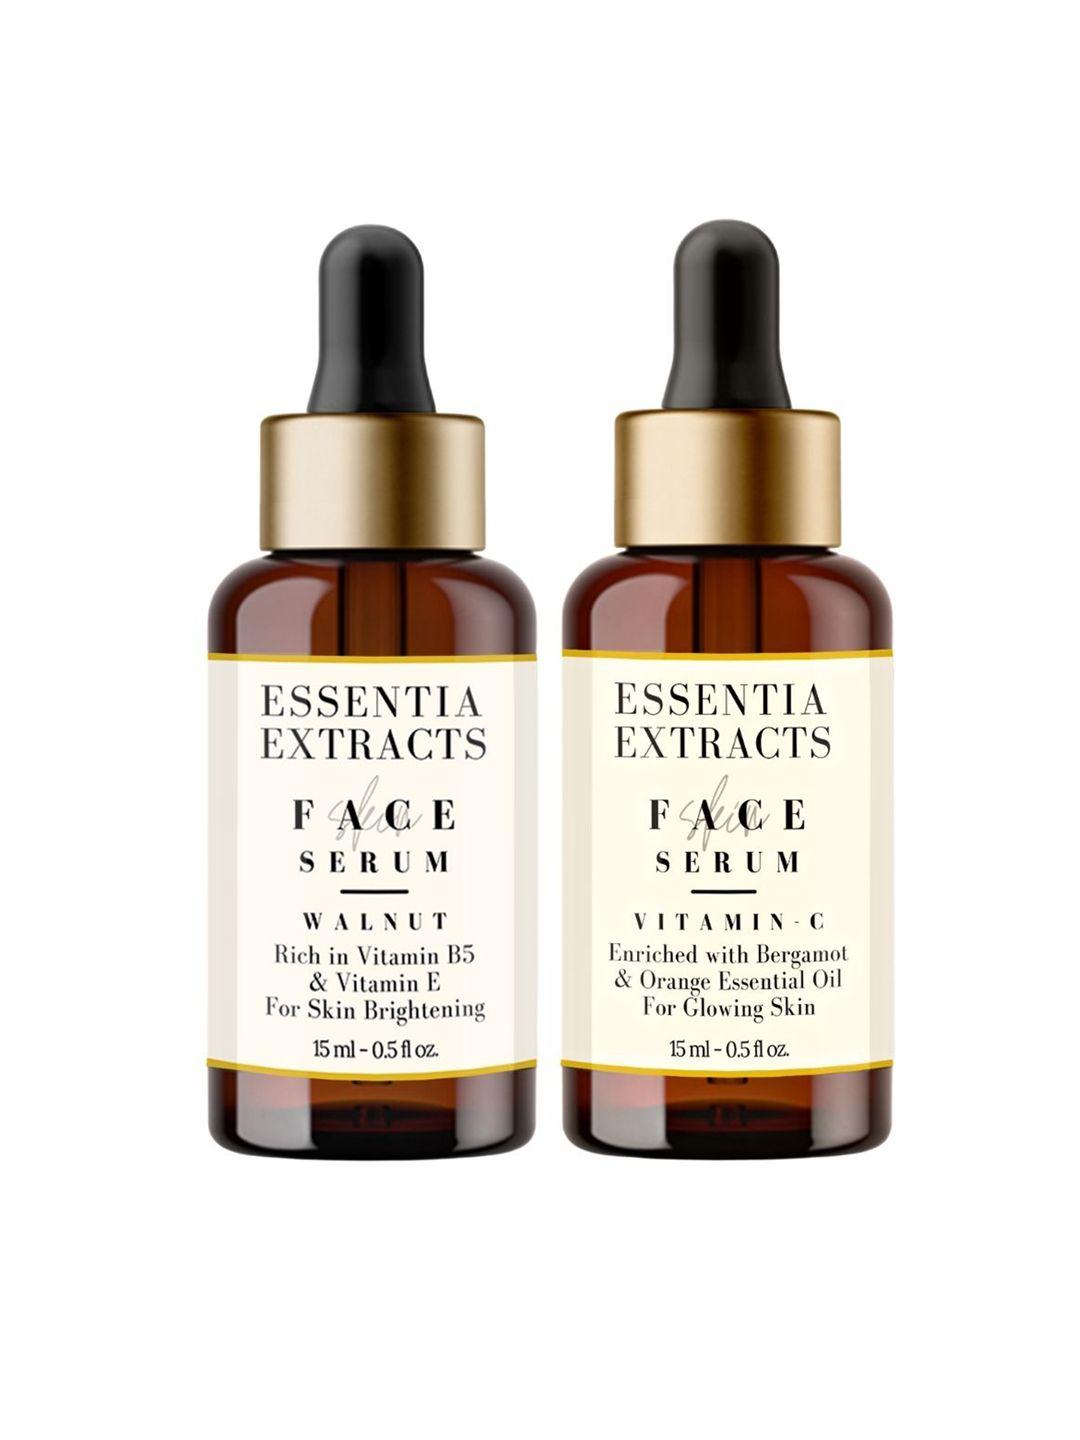 essentia extracts set of walnut & vitamin c face serums - 15 ml each